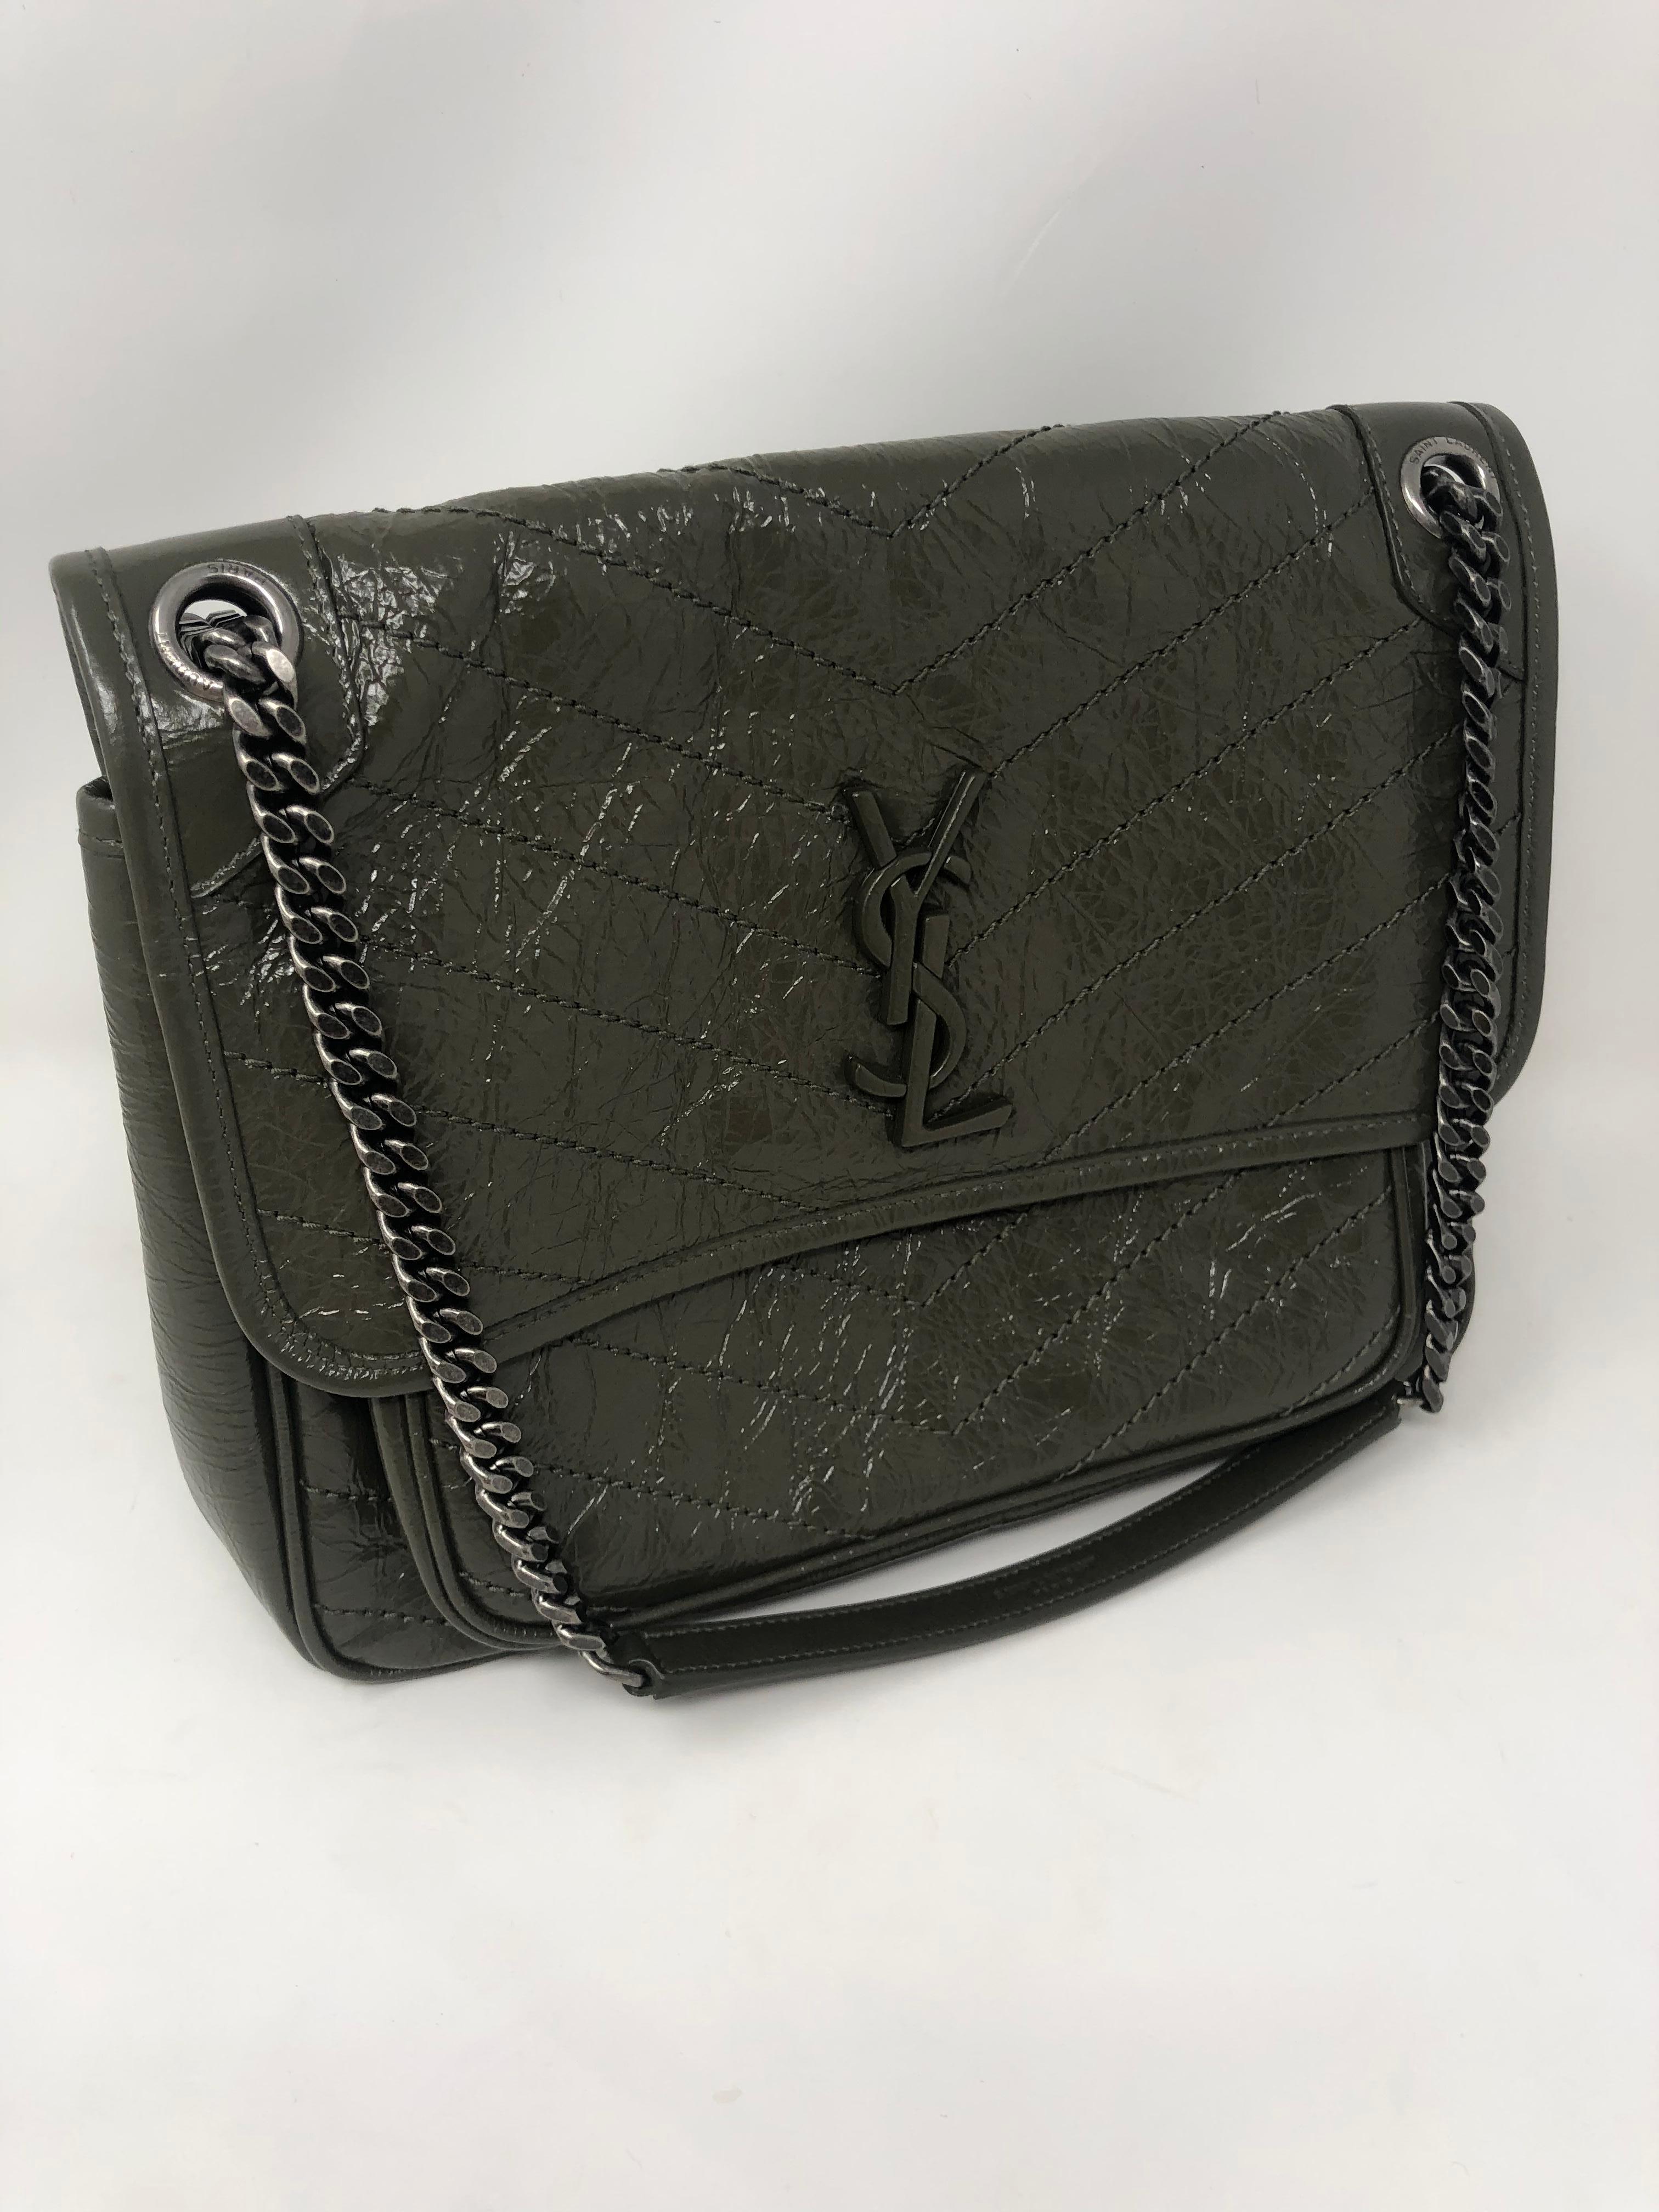 YSL Vert Fonce Medium Niki Bag. Brand new with tag. Guaranteed authentic. 